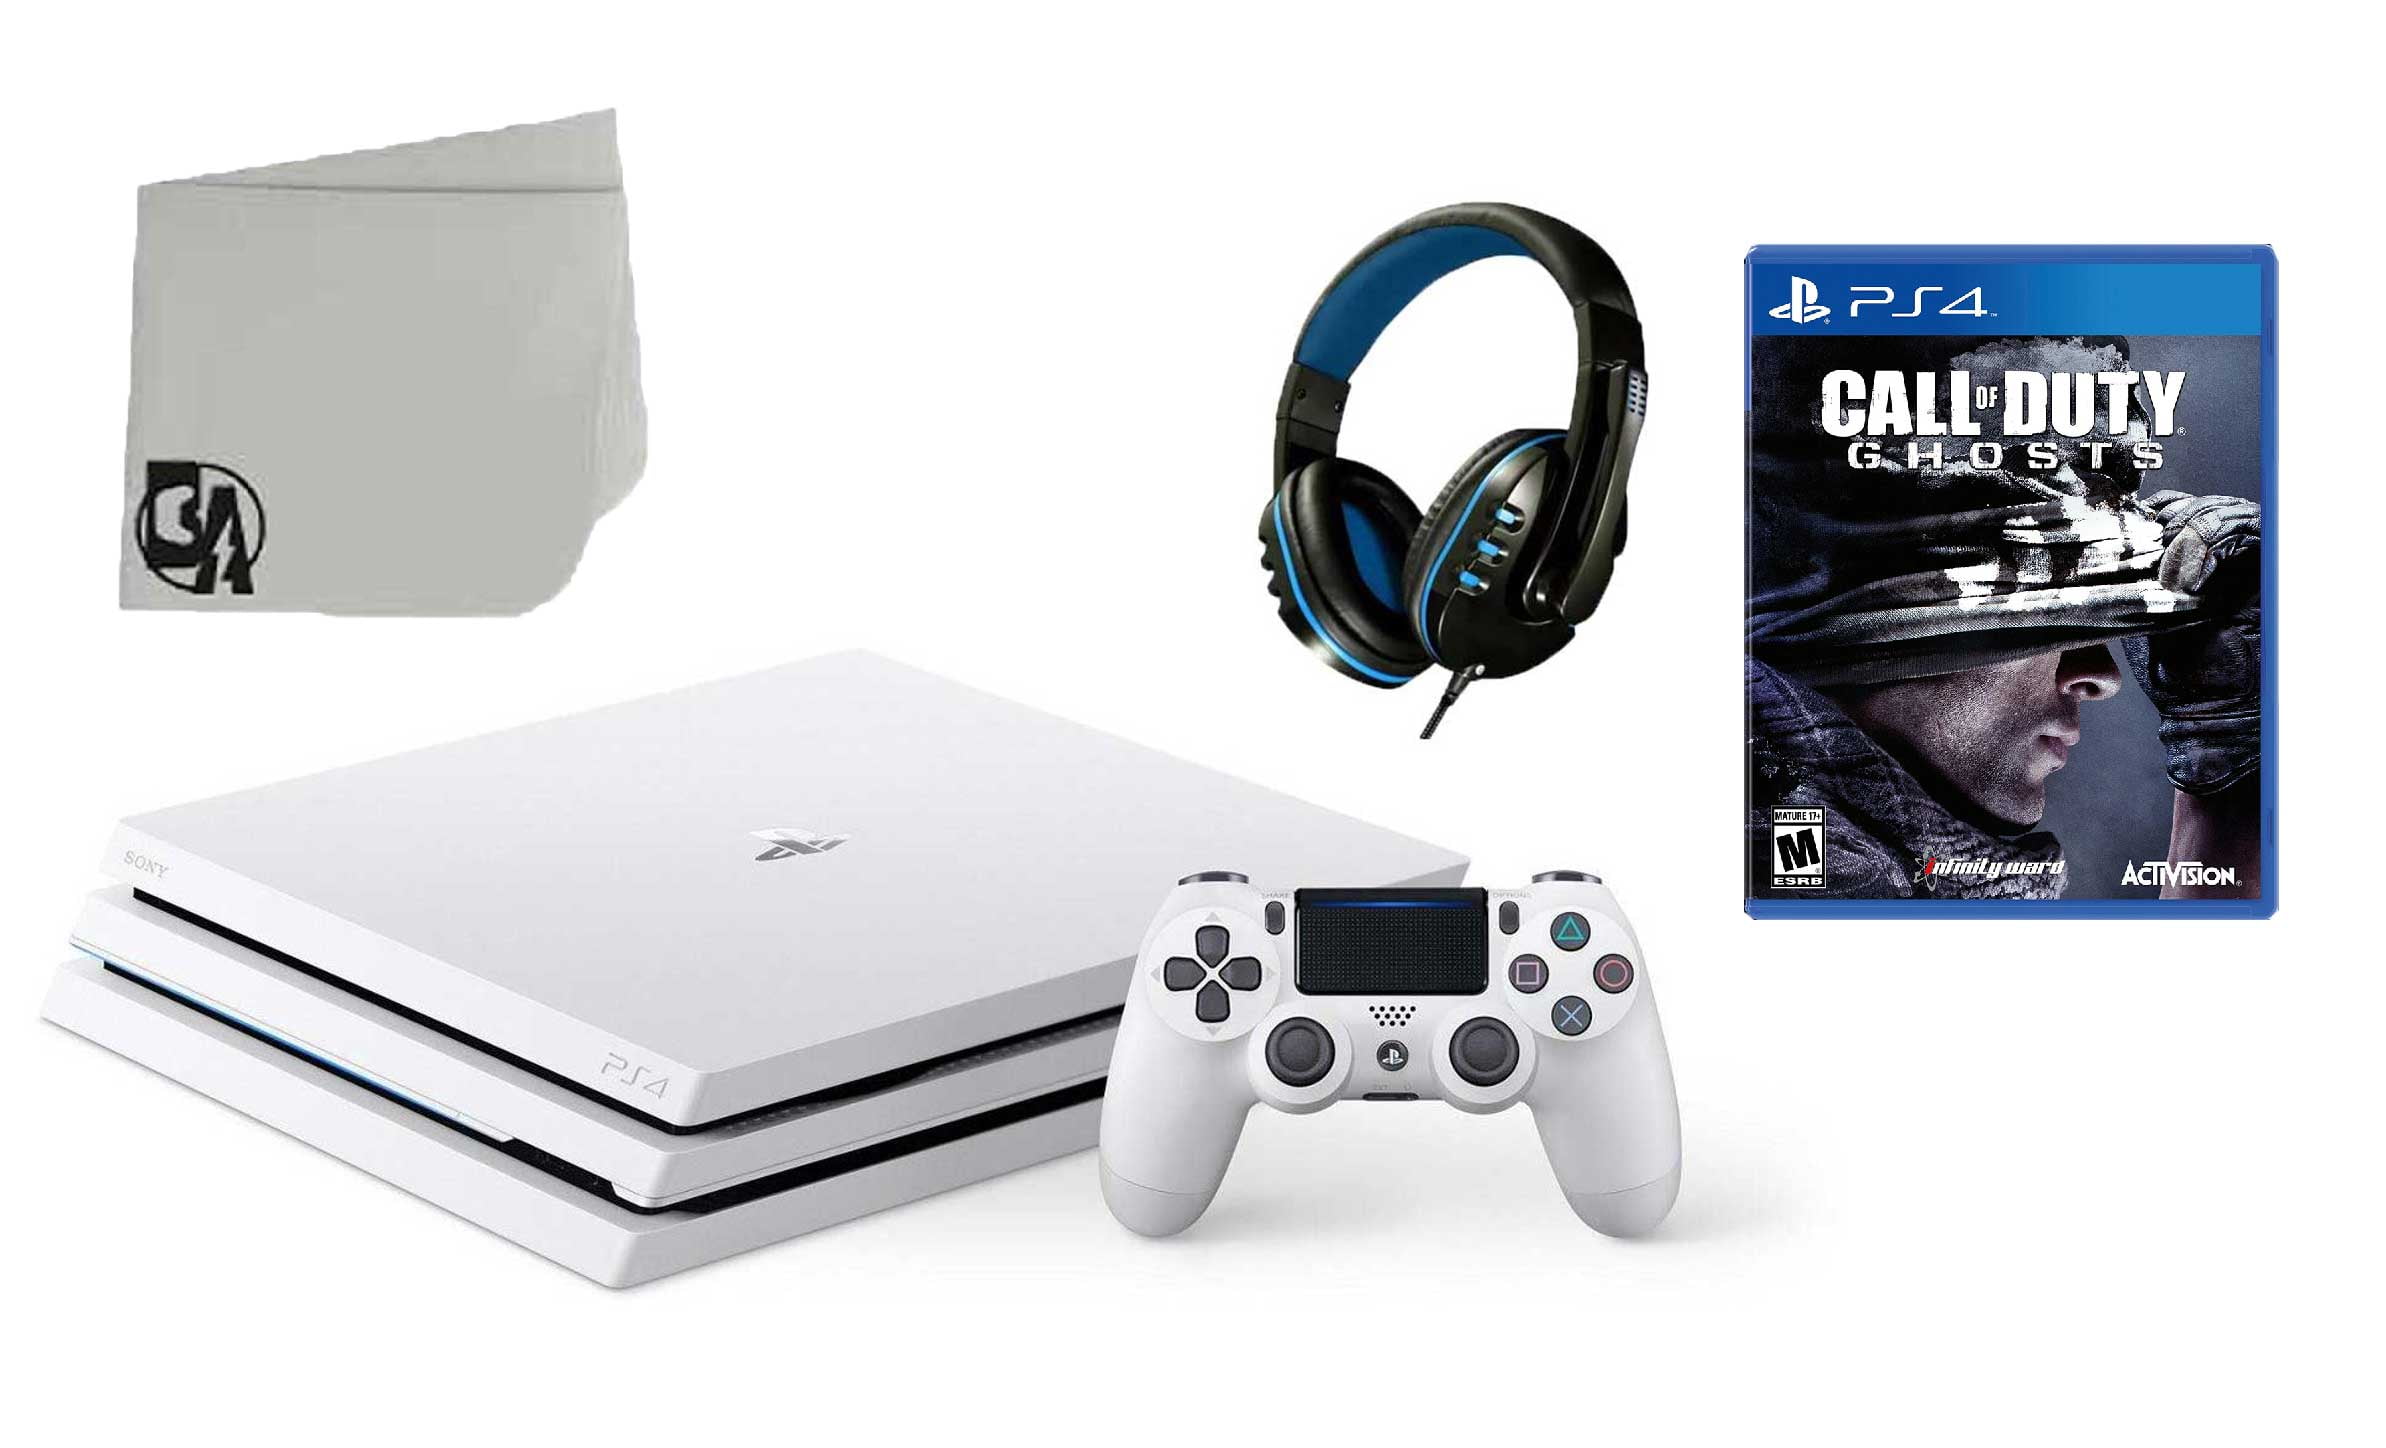 Sony PlayStation 4 PRO Glacier 1TB Gaming Console White with Call of Duty  Ghosts BOLT AXTION Bundle Like New 